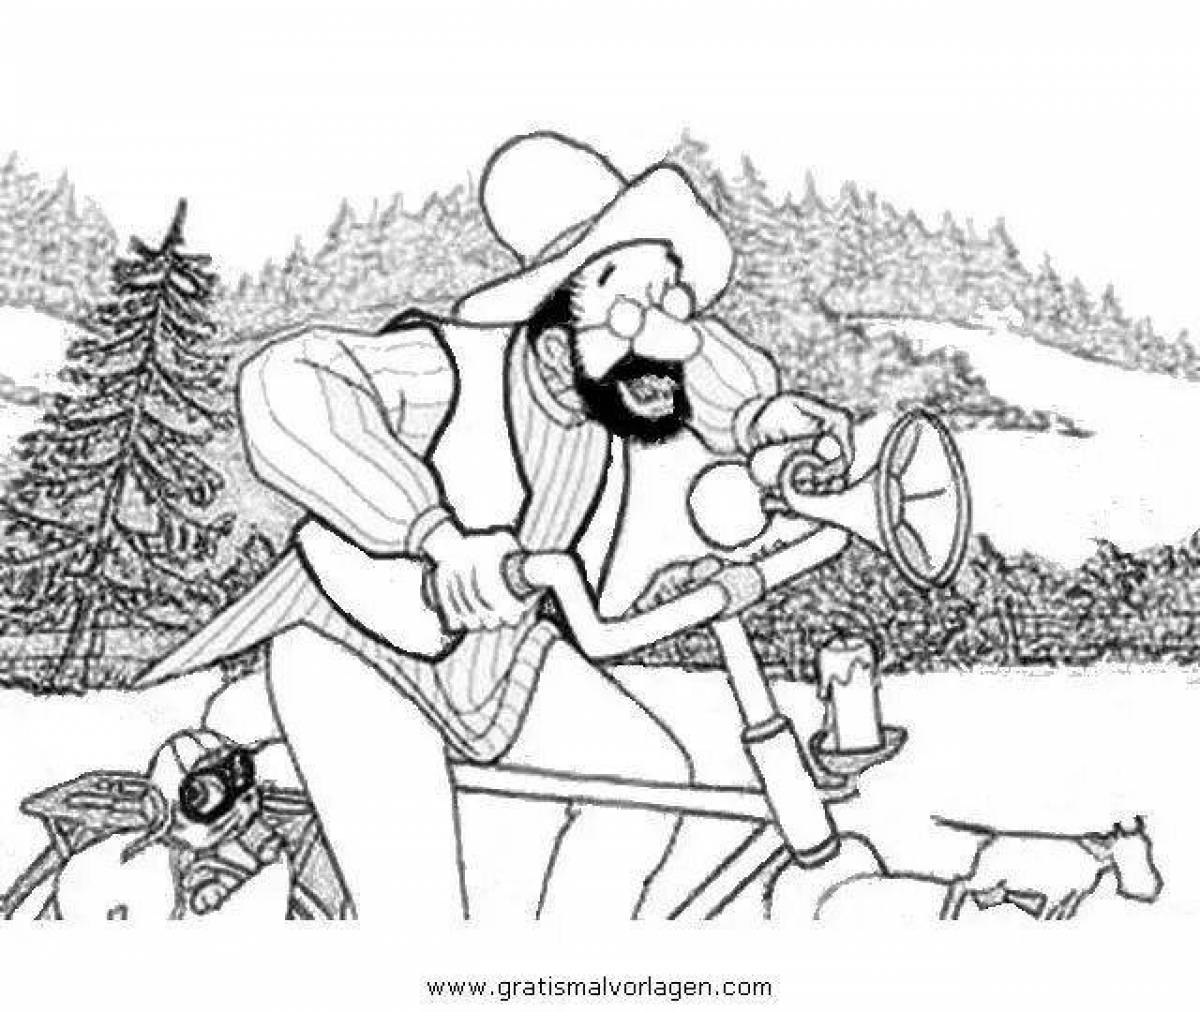 Jovial findus and petson coloring page